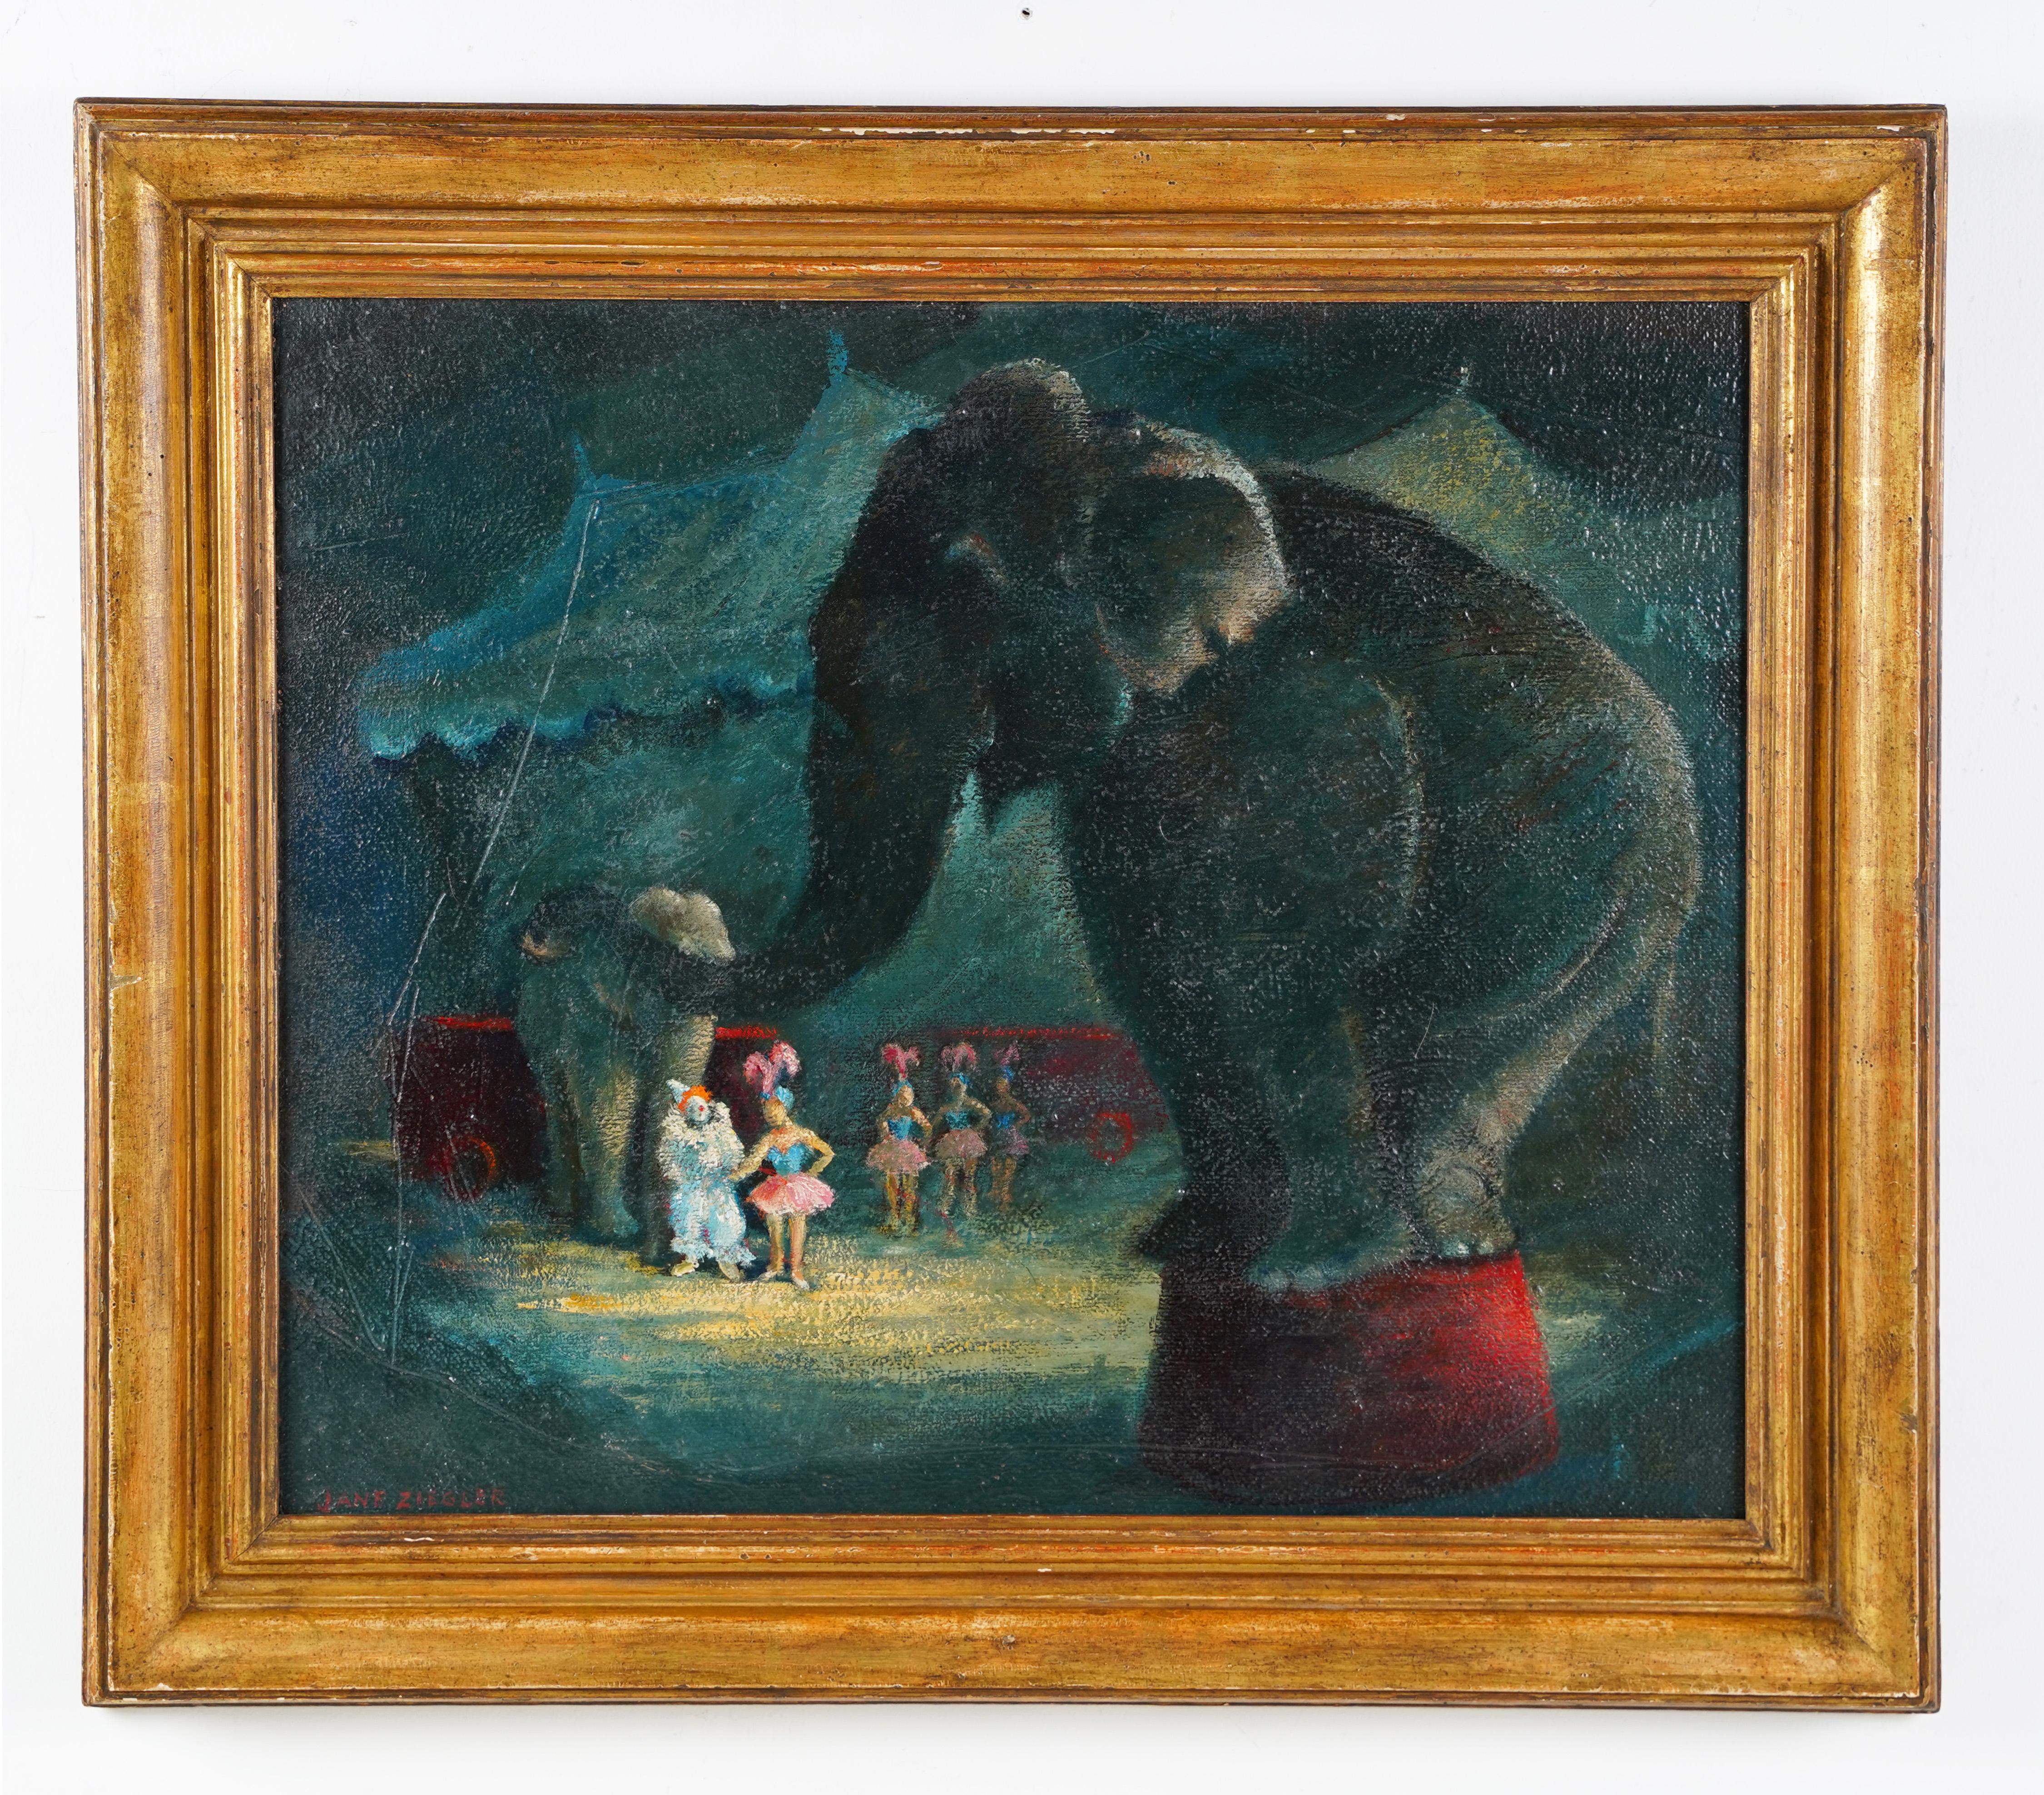  Antique American School Signed Circus Elephant Framed Woman Artist Oil Painting 1